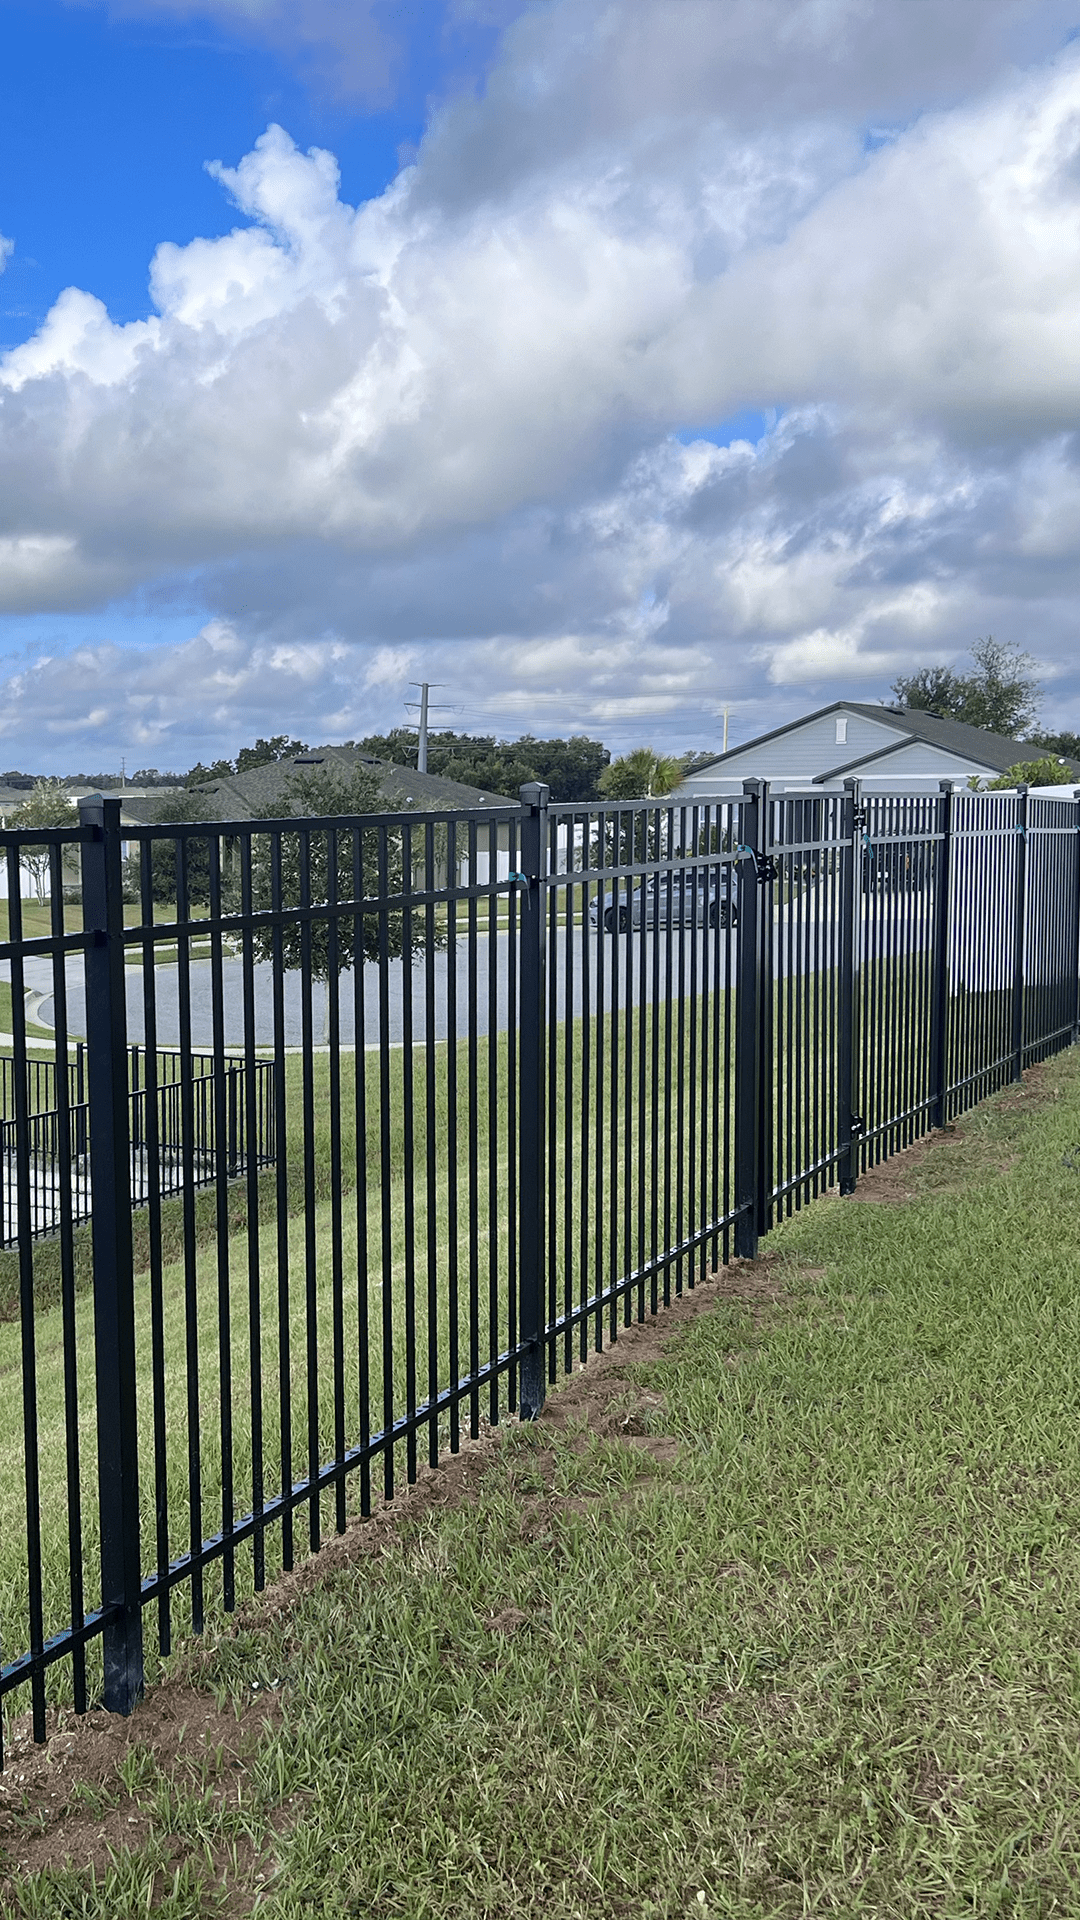 This is 5-foot-high aluminum fence installed in the Orlando area.